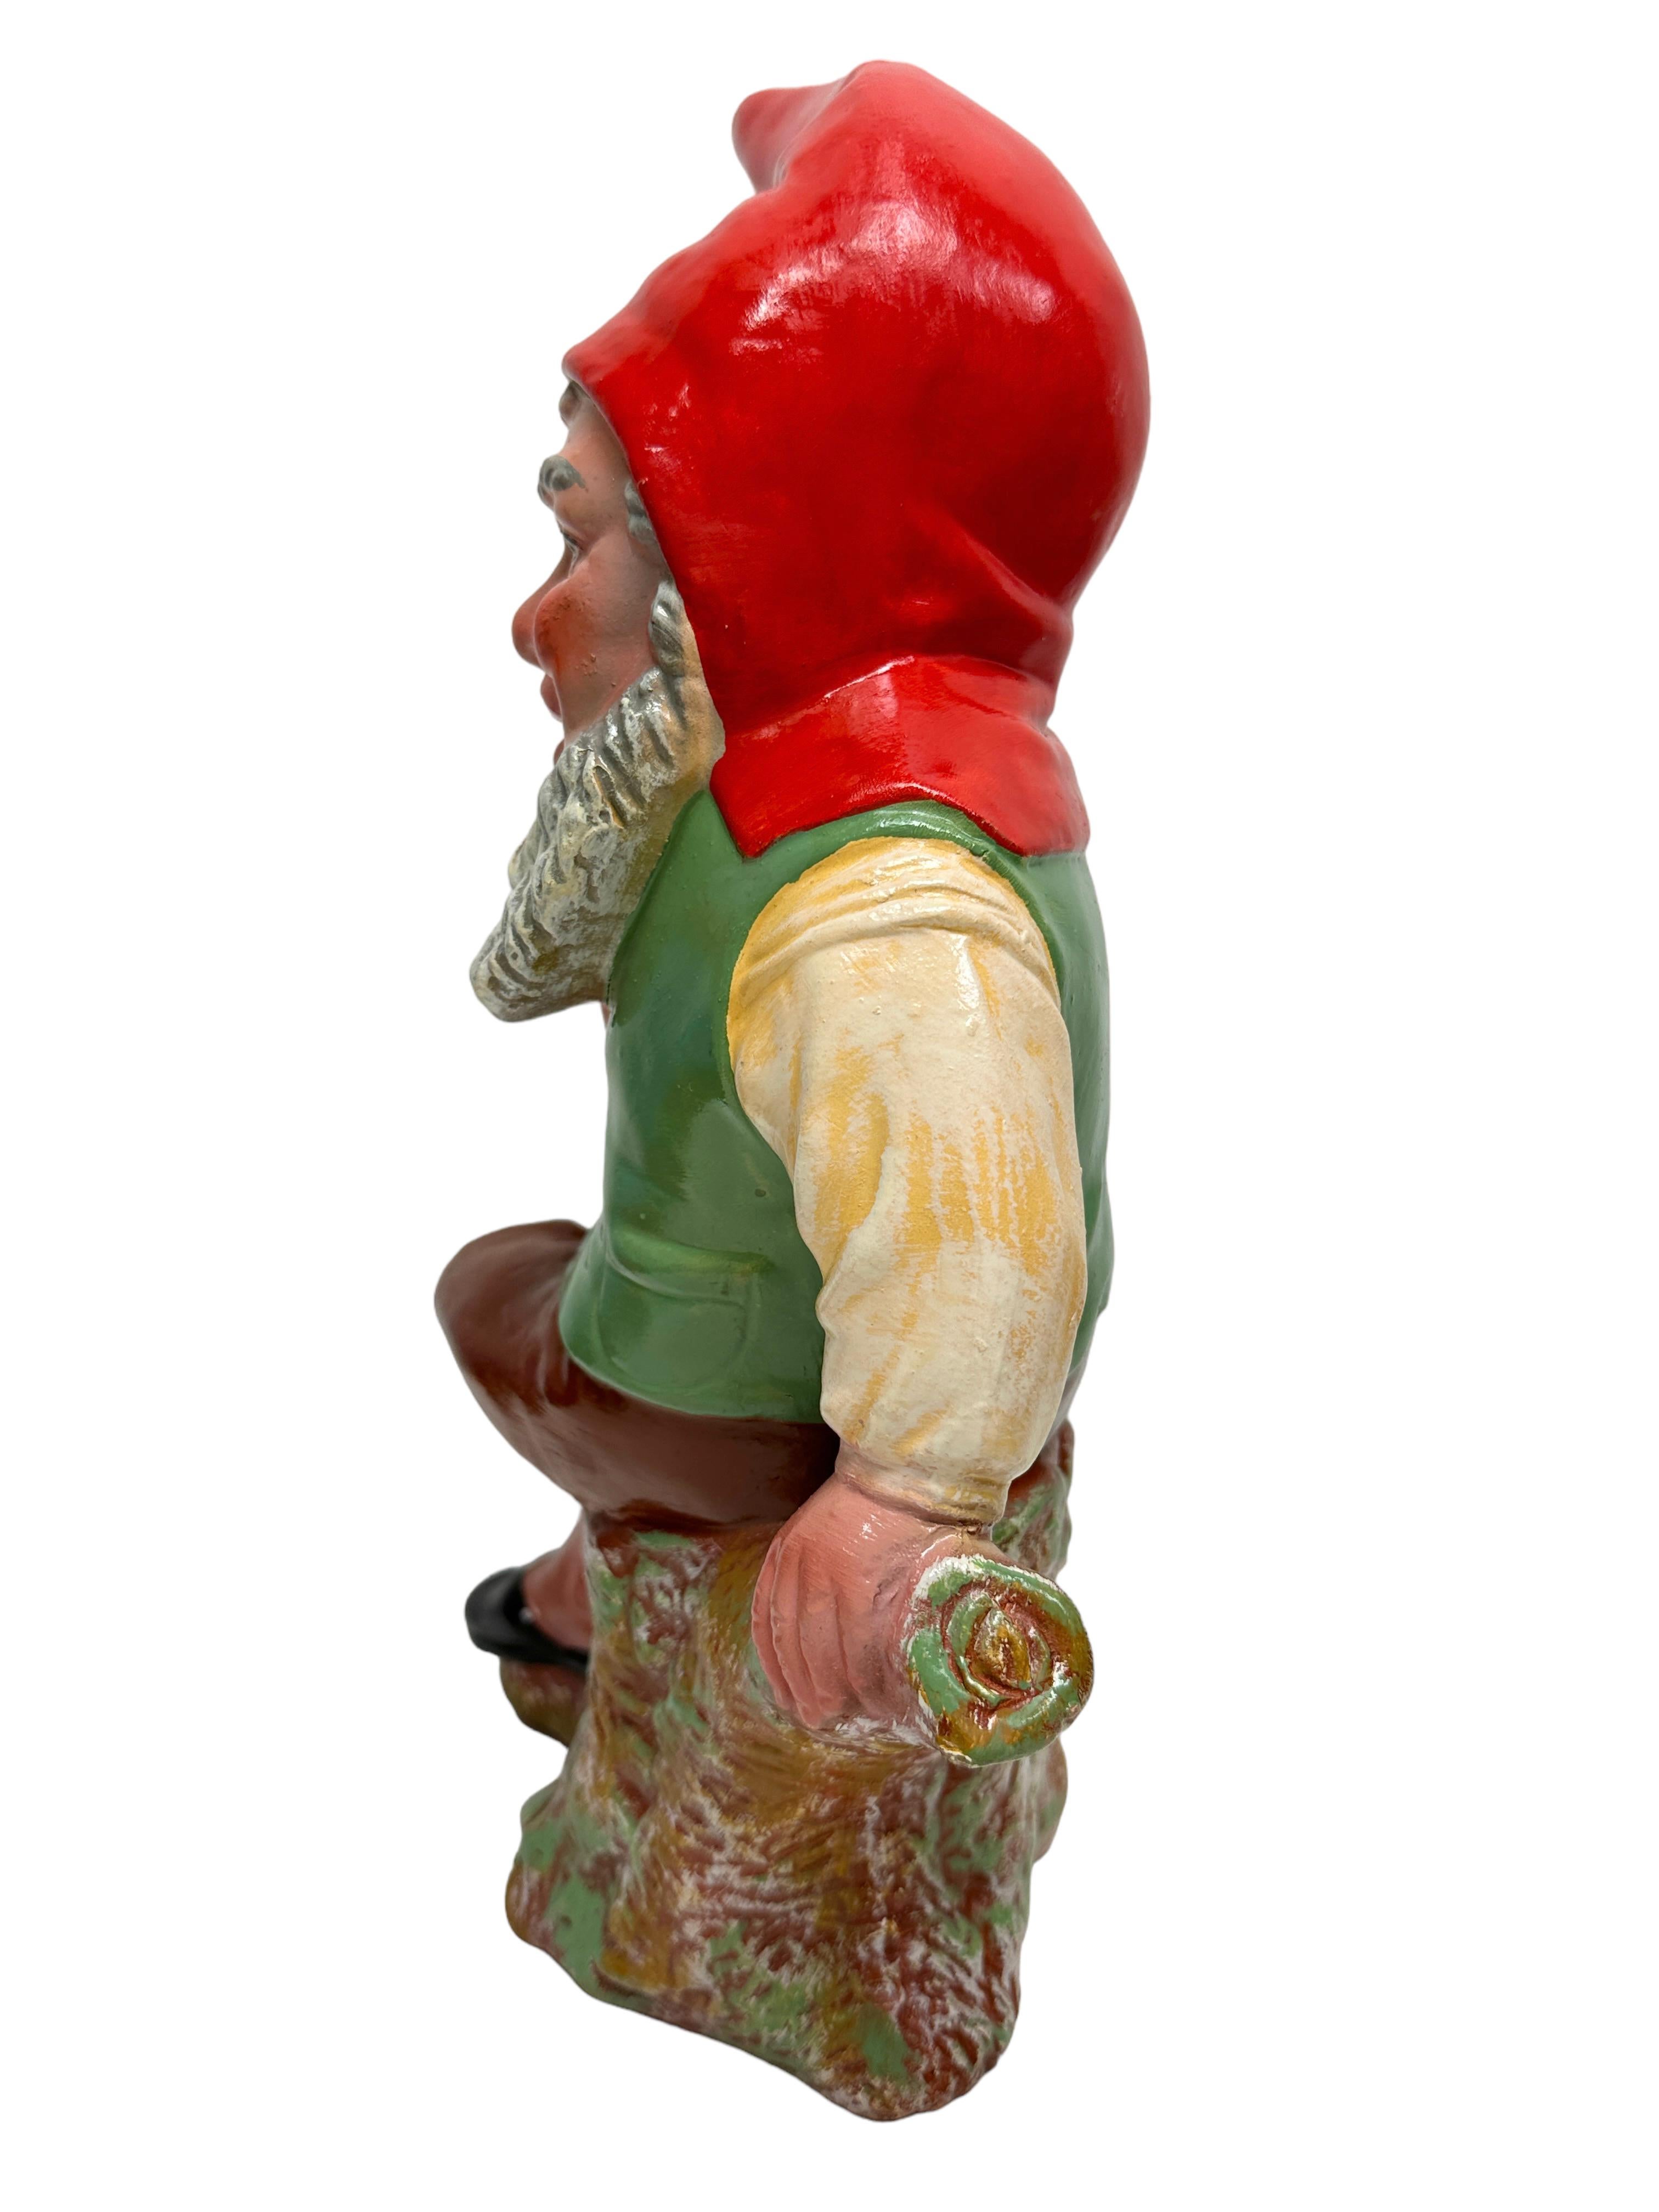 A gorgeous character ceramic figural gnome statue. This character statue has been made in Germany, in the 1920s or older. Absolutely gorgeous item with lots of character and still in good, used condition, without damage. Some paint lost, but this is